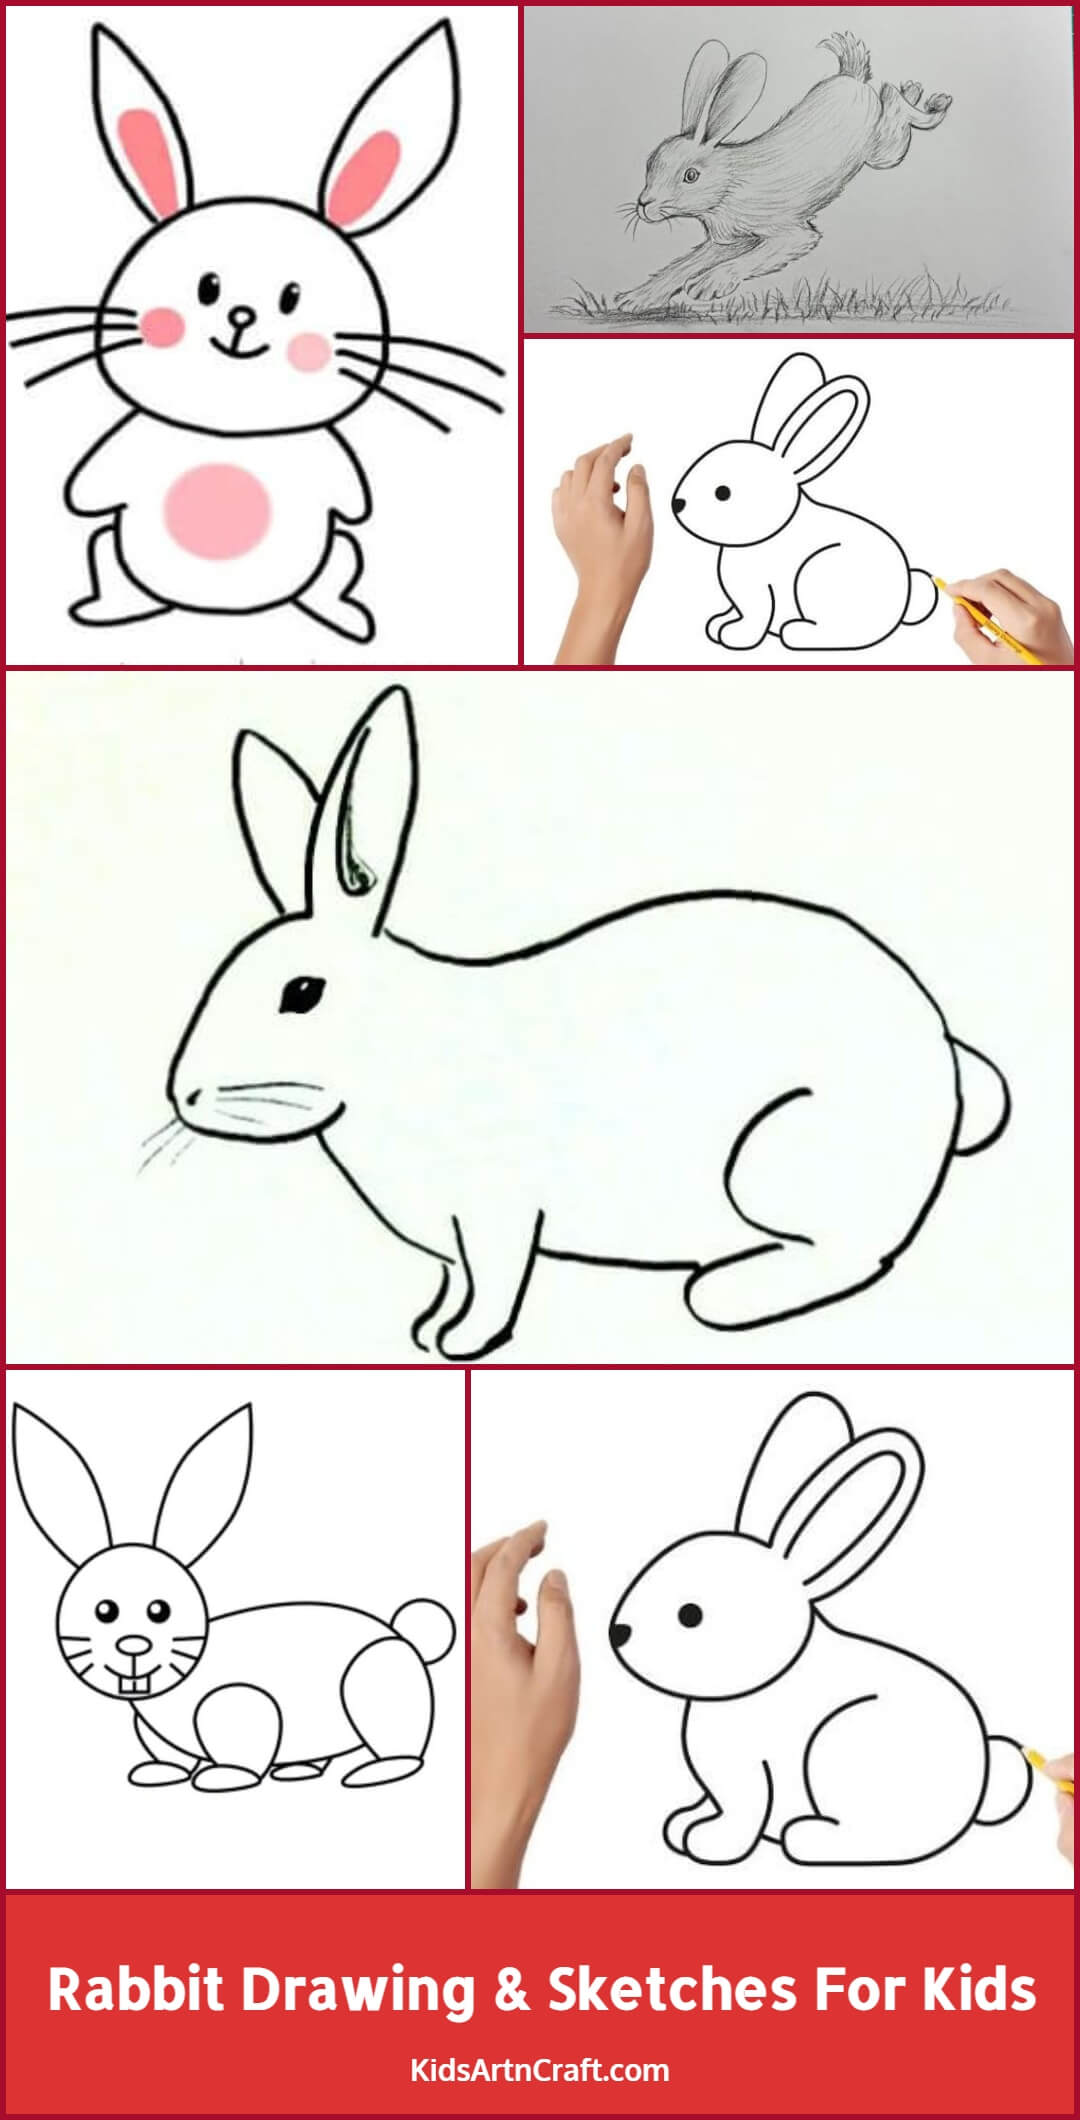 Rabbit Drawing & Sketches for Kids